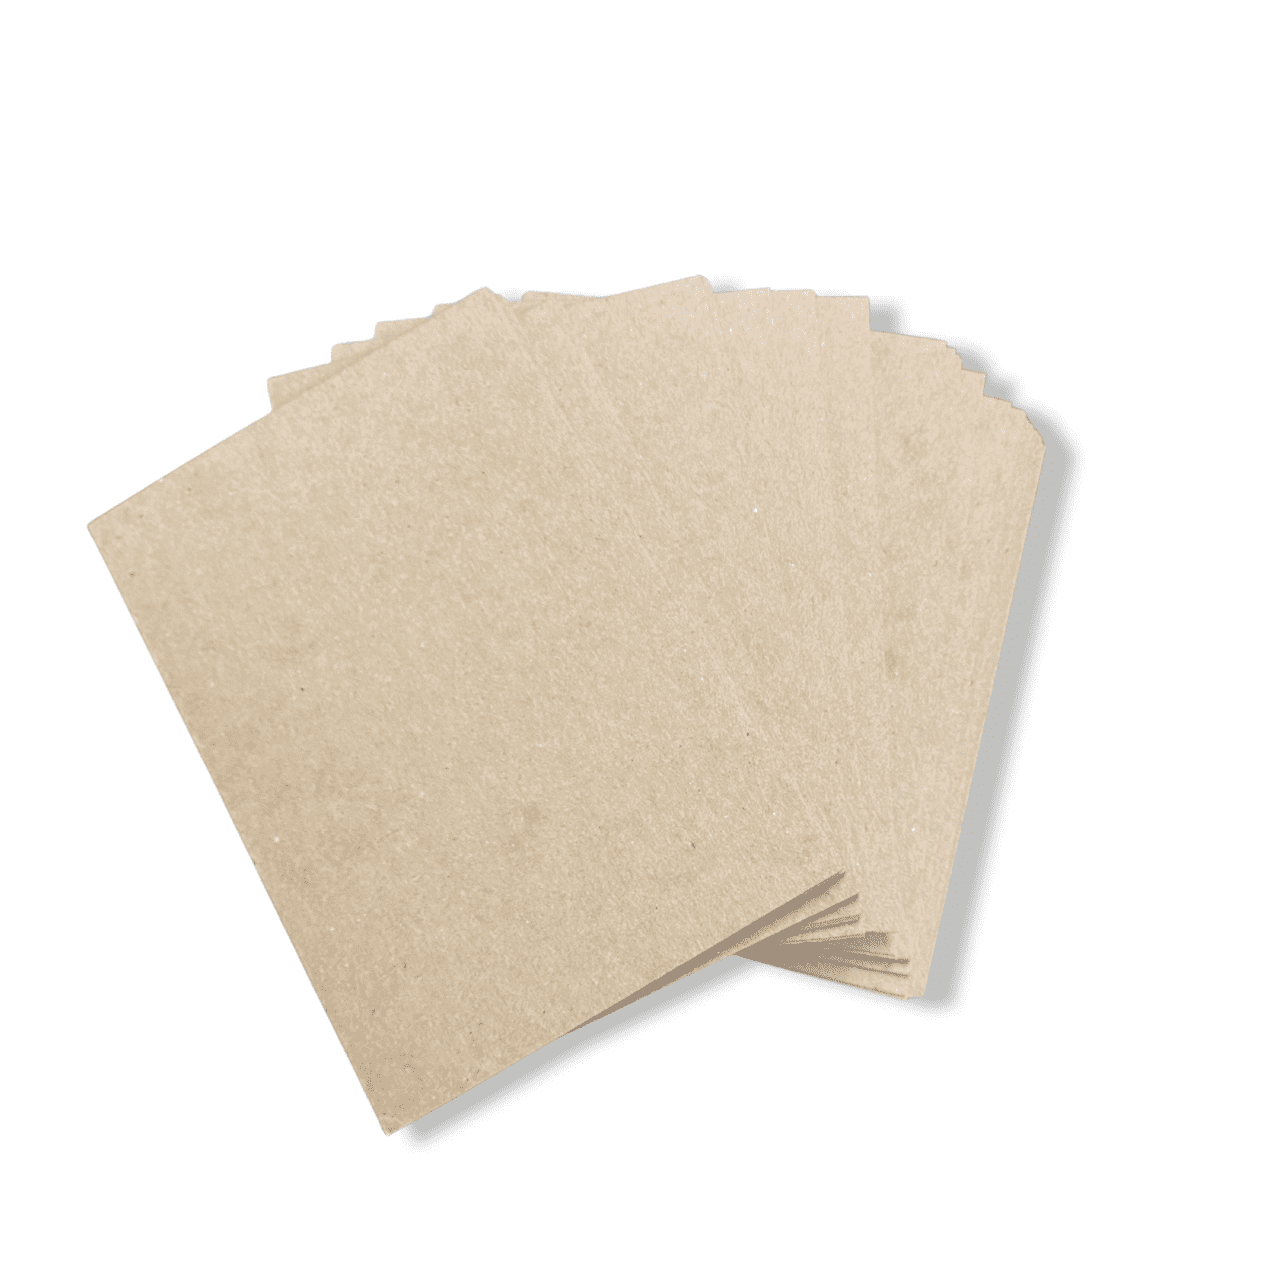 100 5.5x8.5 Inch Chipboard Sheets, 22 Point Recycled Pressed